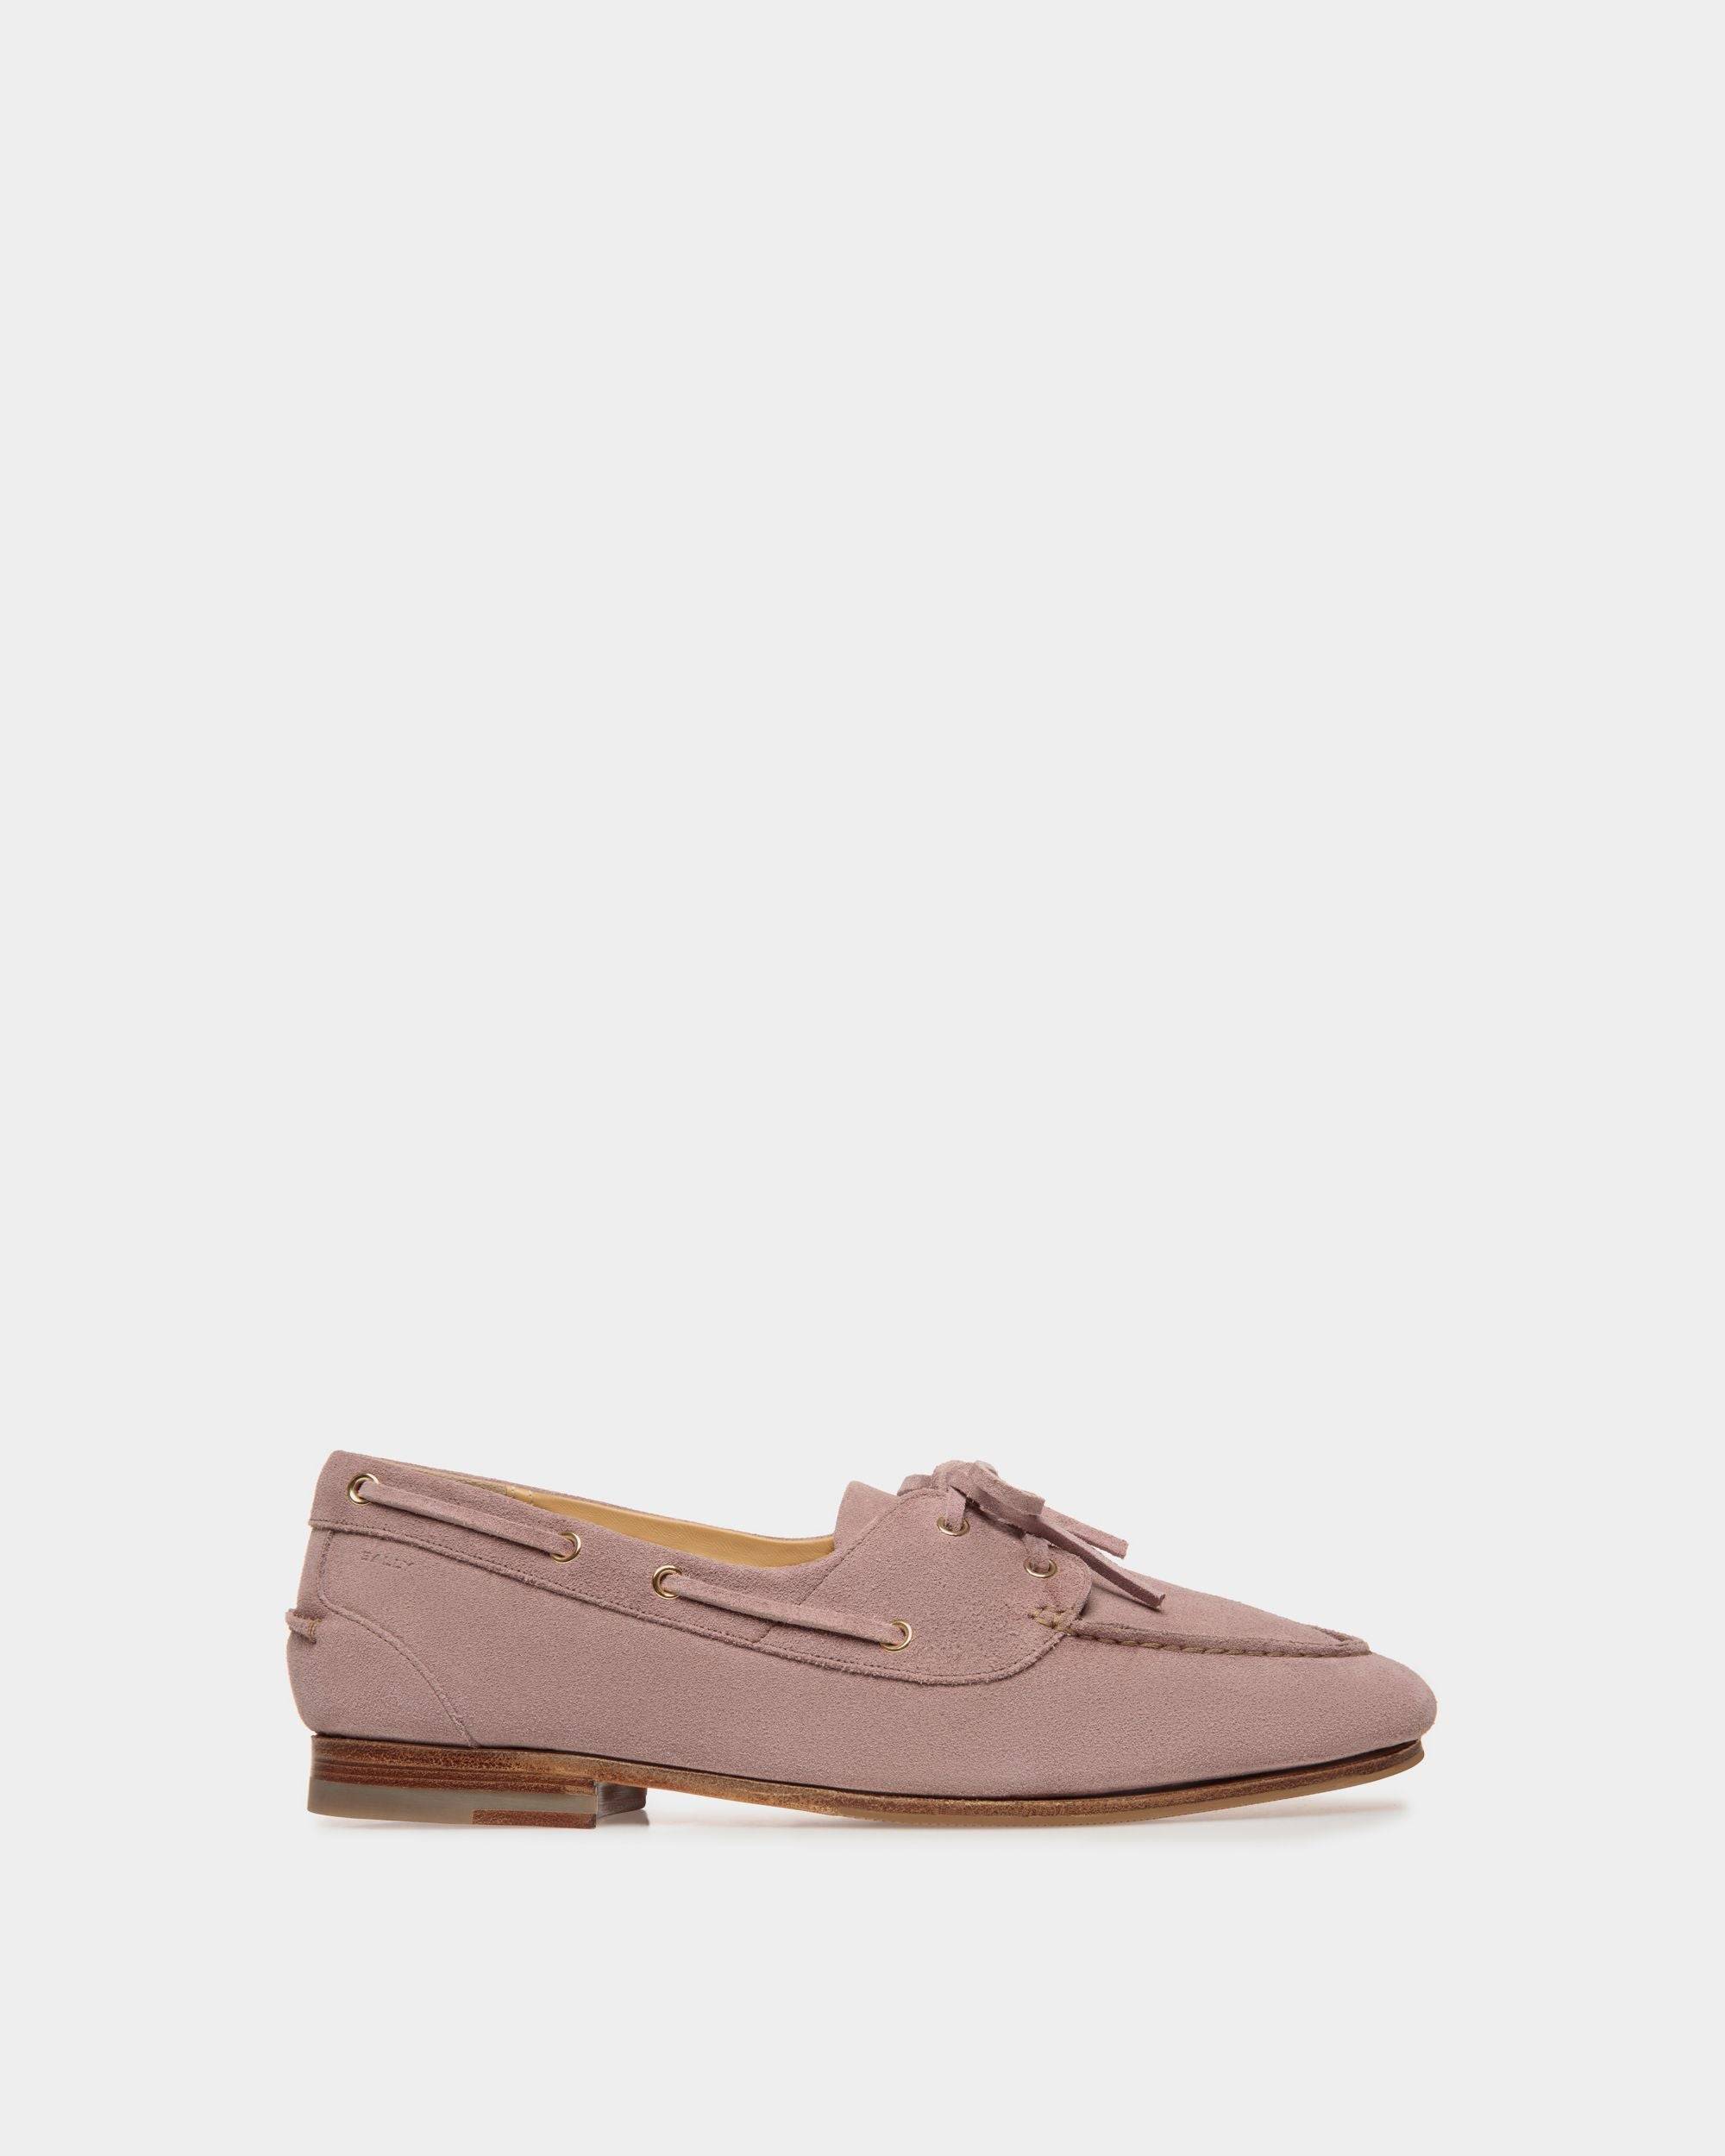 Men's Plume Moccasin in Light Mauve Suede | Bally | Still Life Side